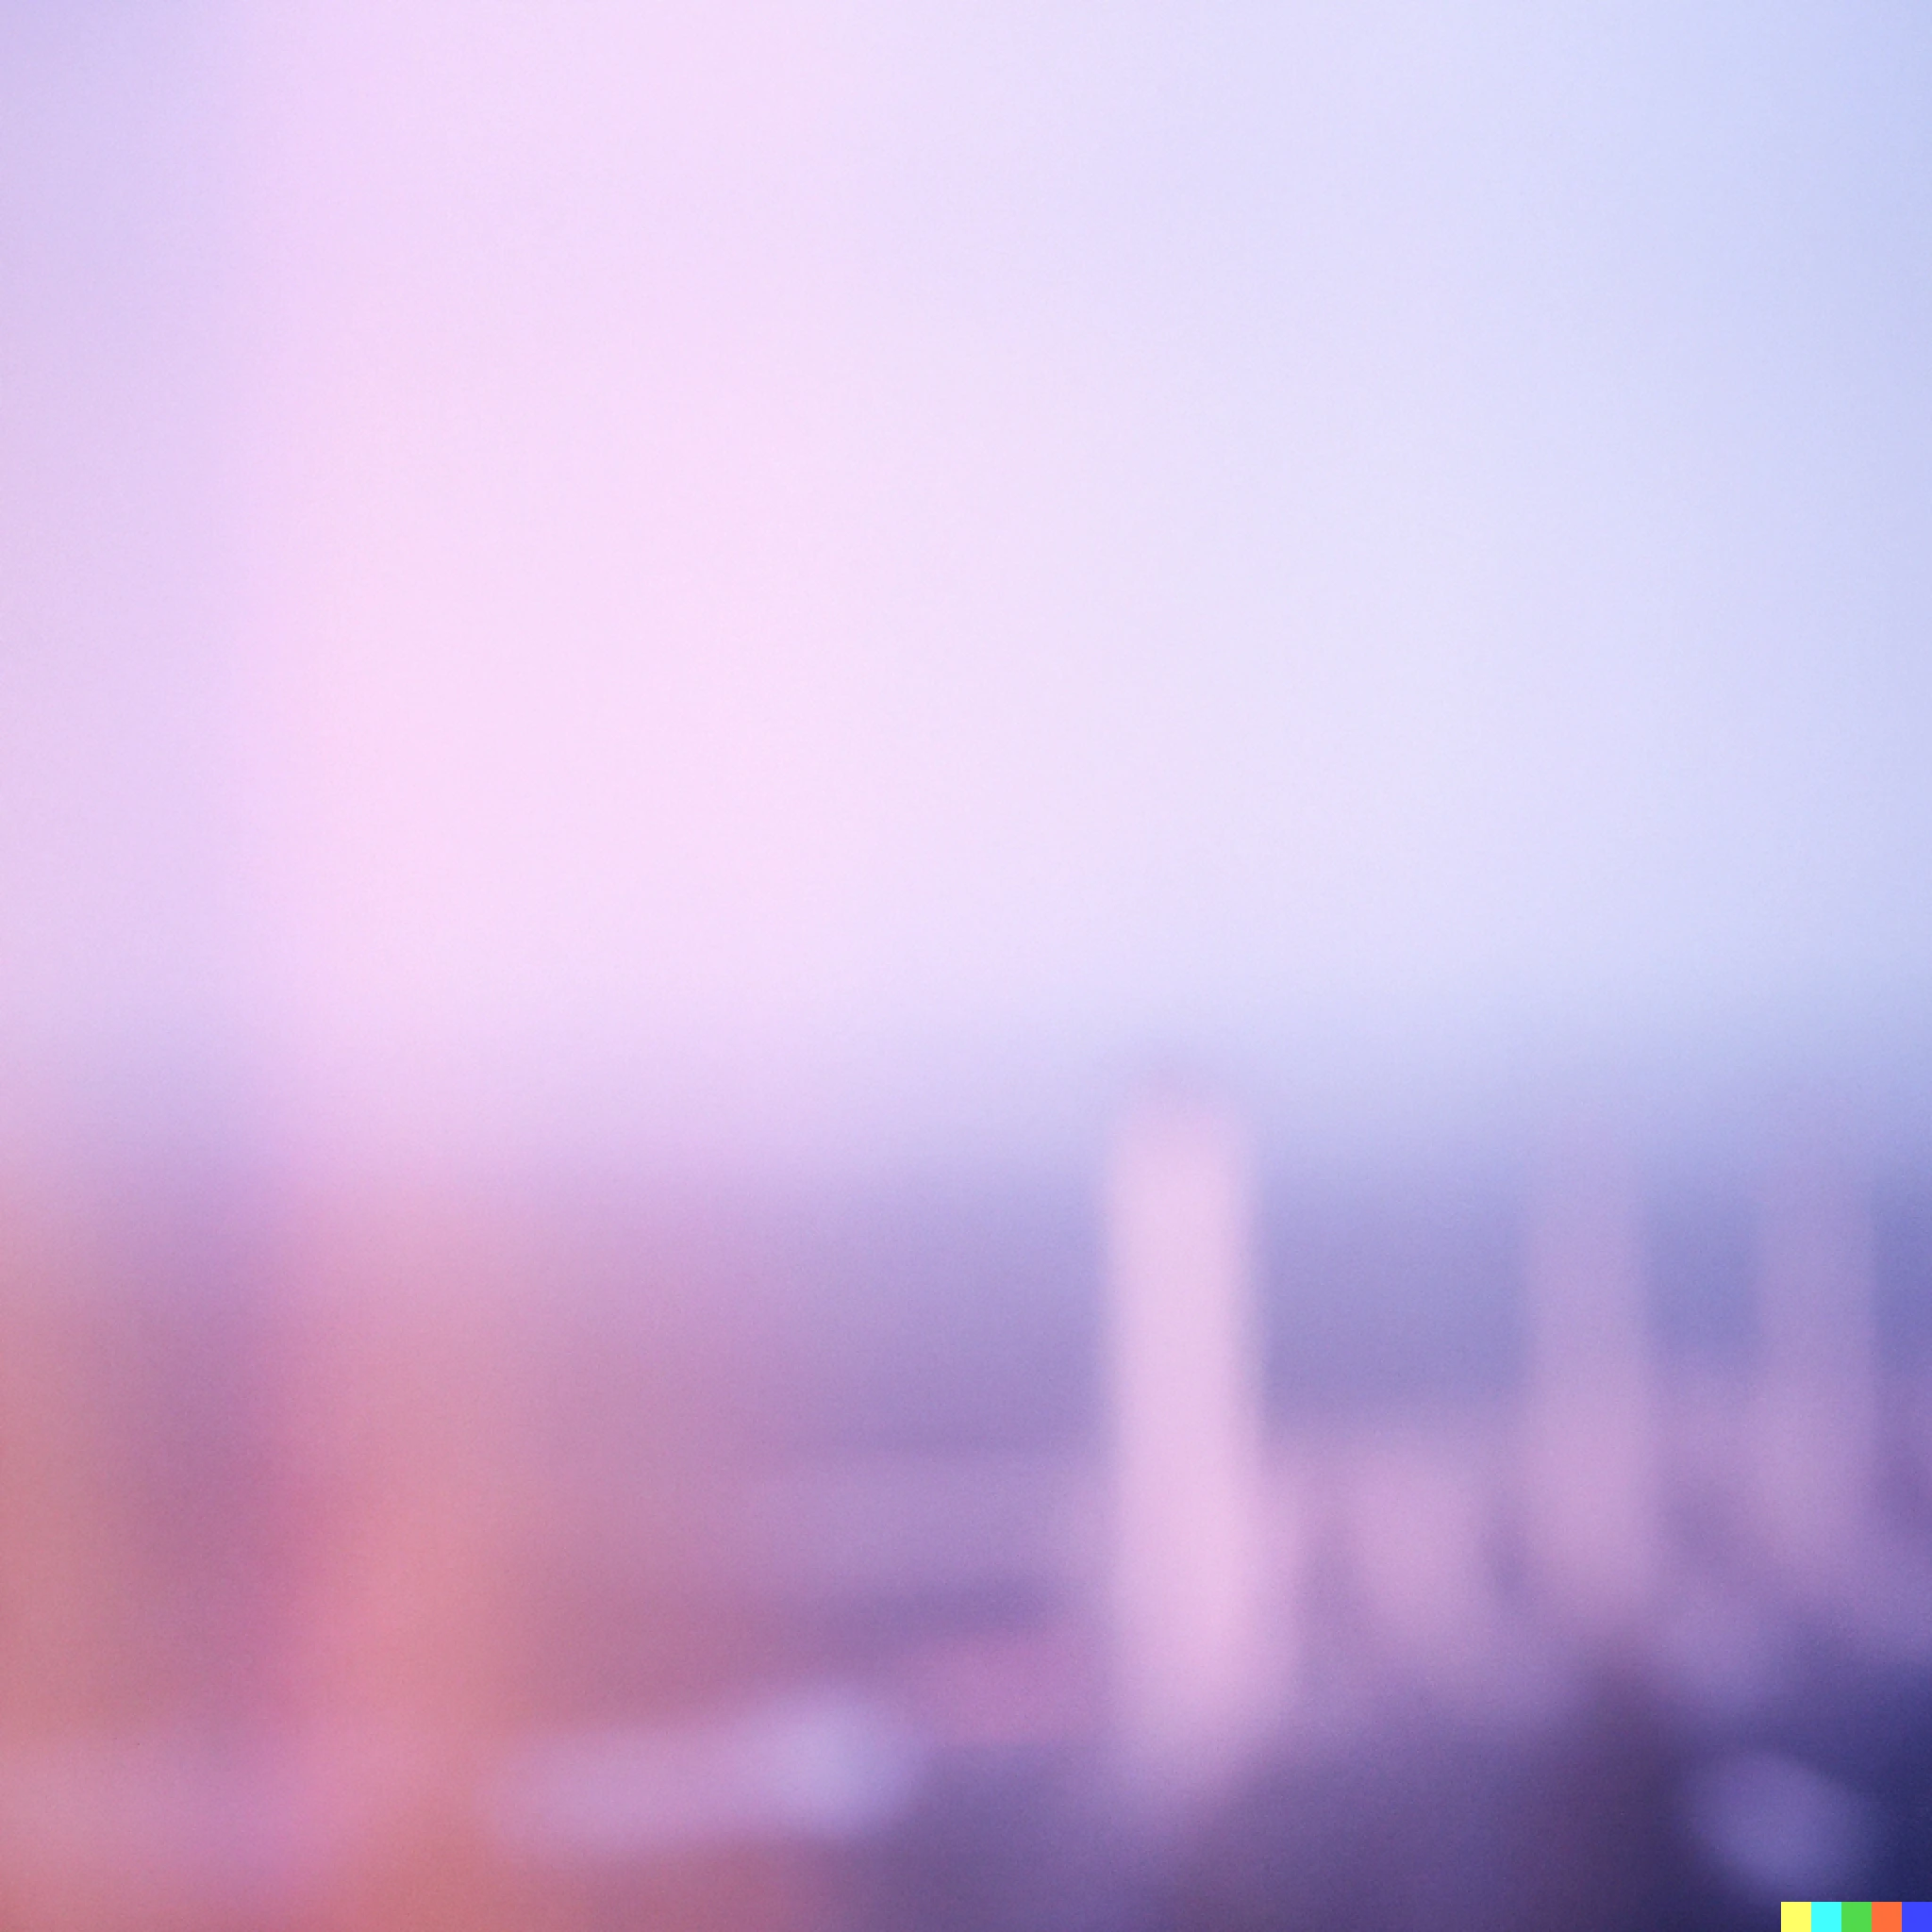 A textural, blurred image of pinks and purples.